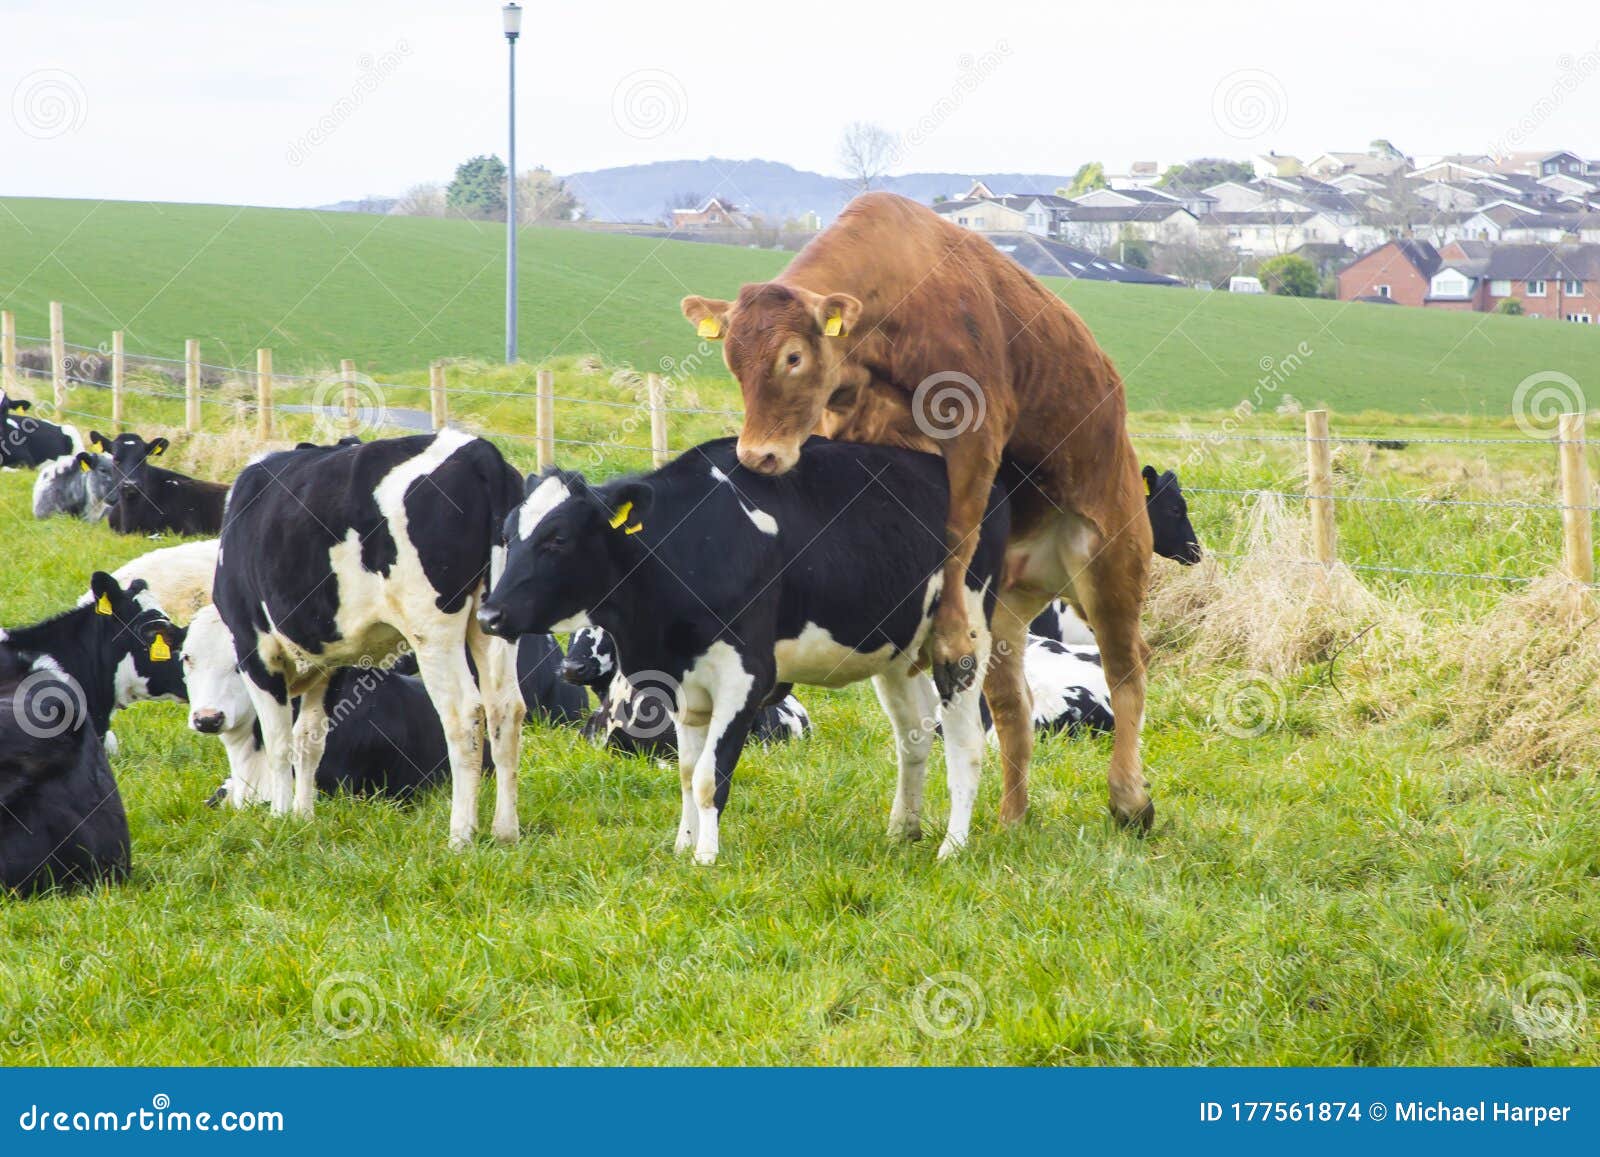 A Bull Mounting A Cow In A Field Of Cattle Stock Photo Image Of Hills